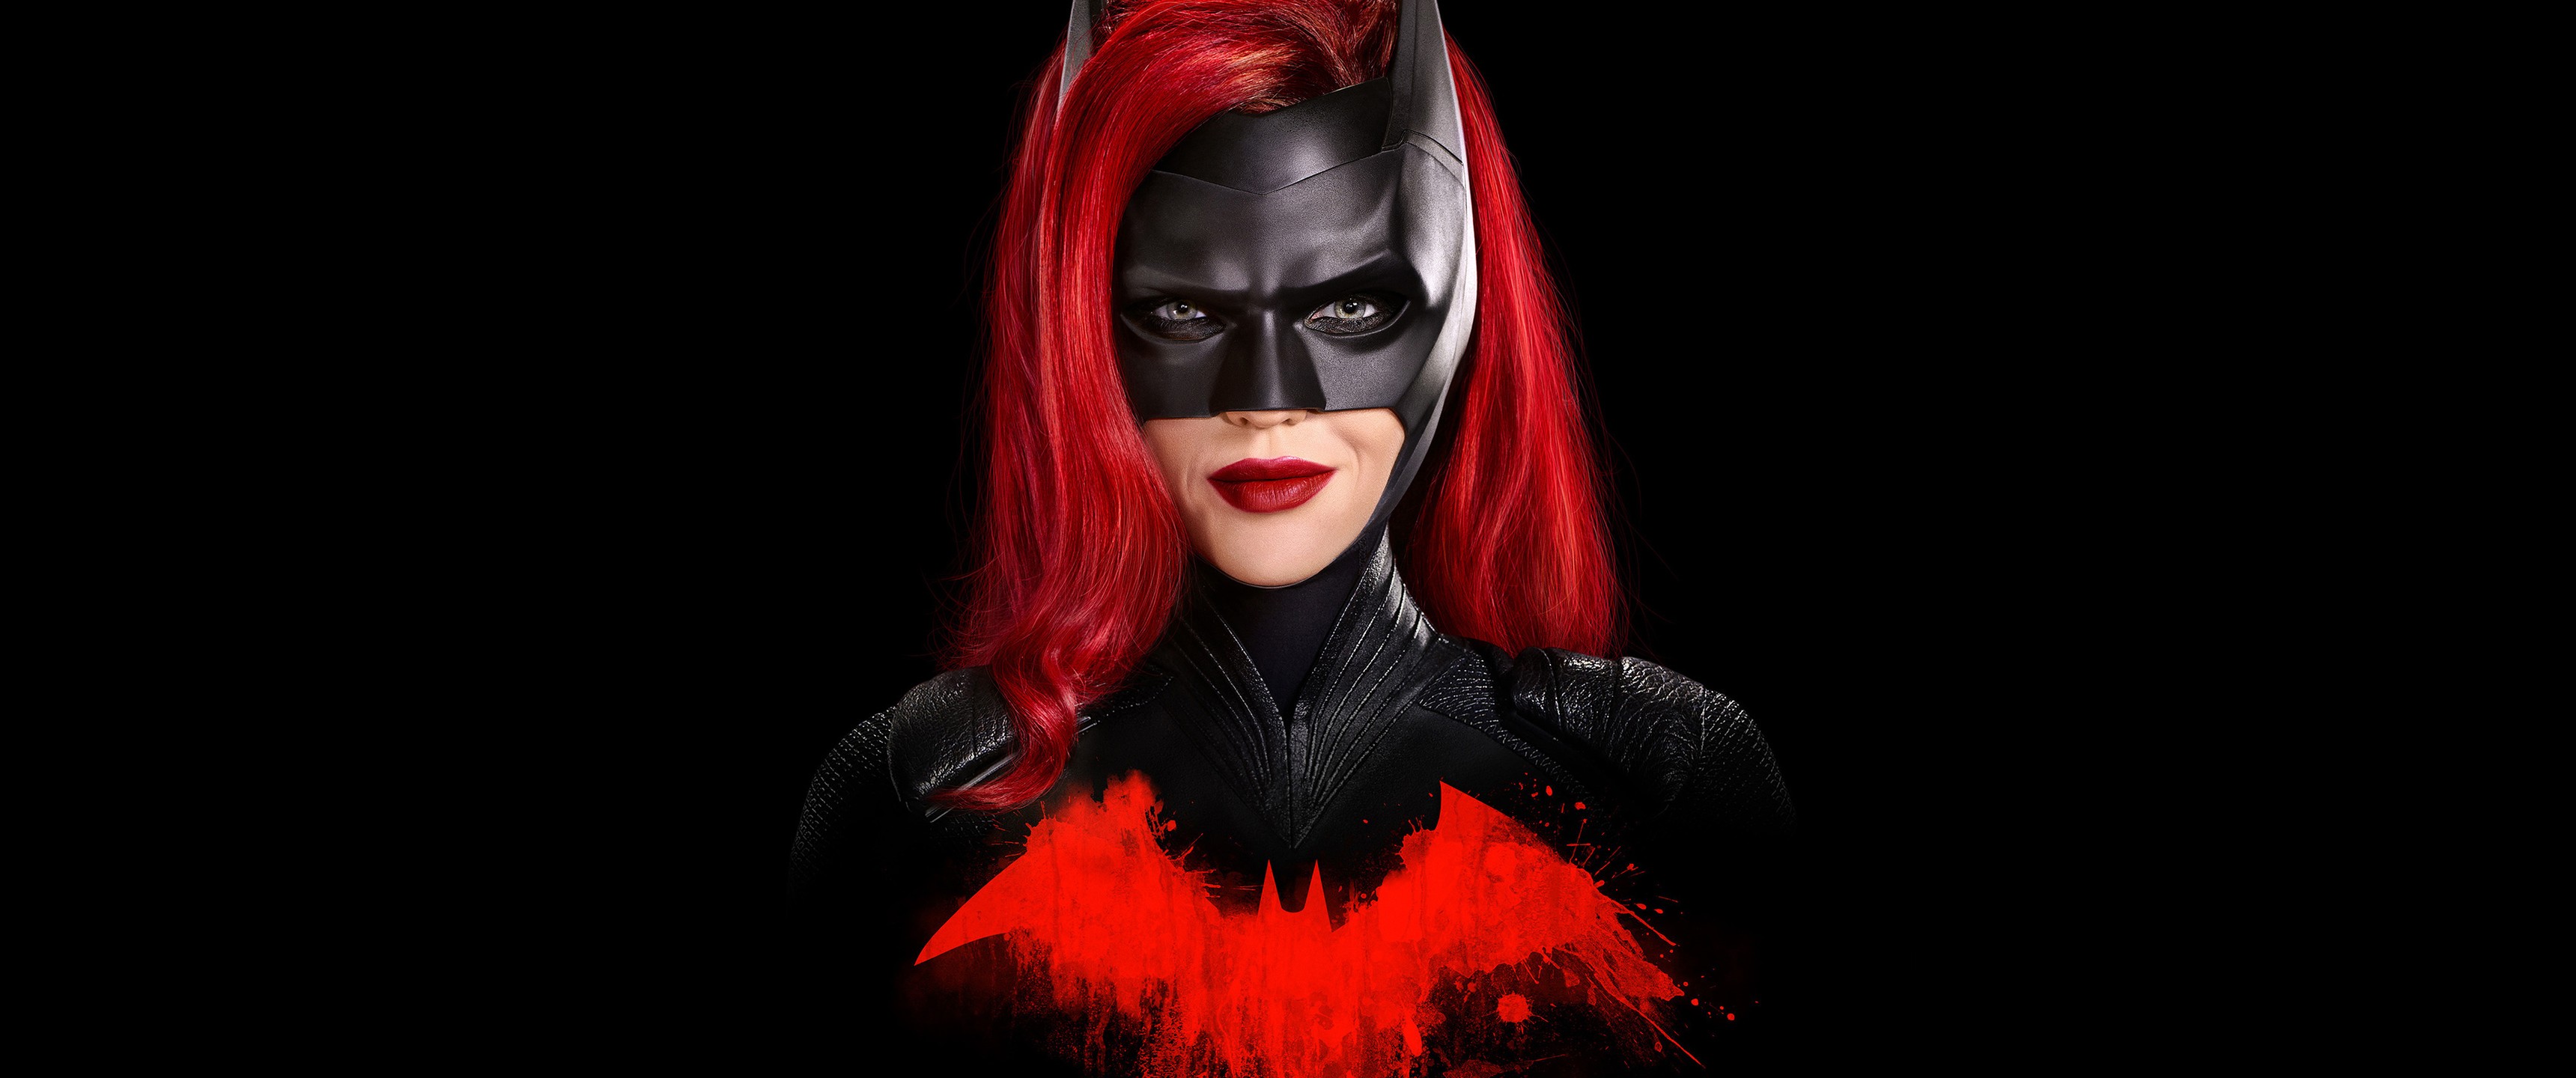 Batwoman 3440x1440 Hot Desktop and background for your PC and mobile